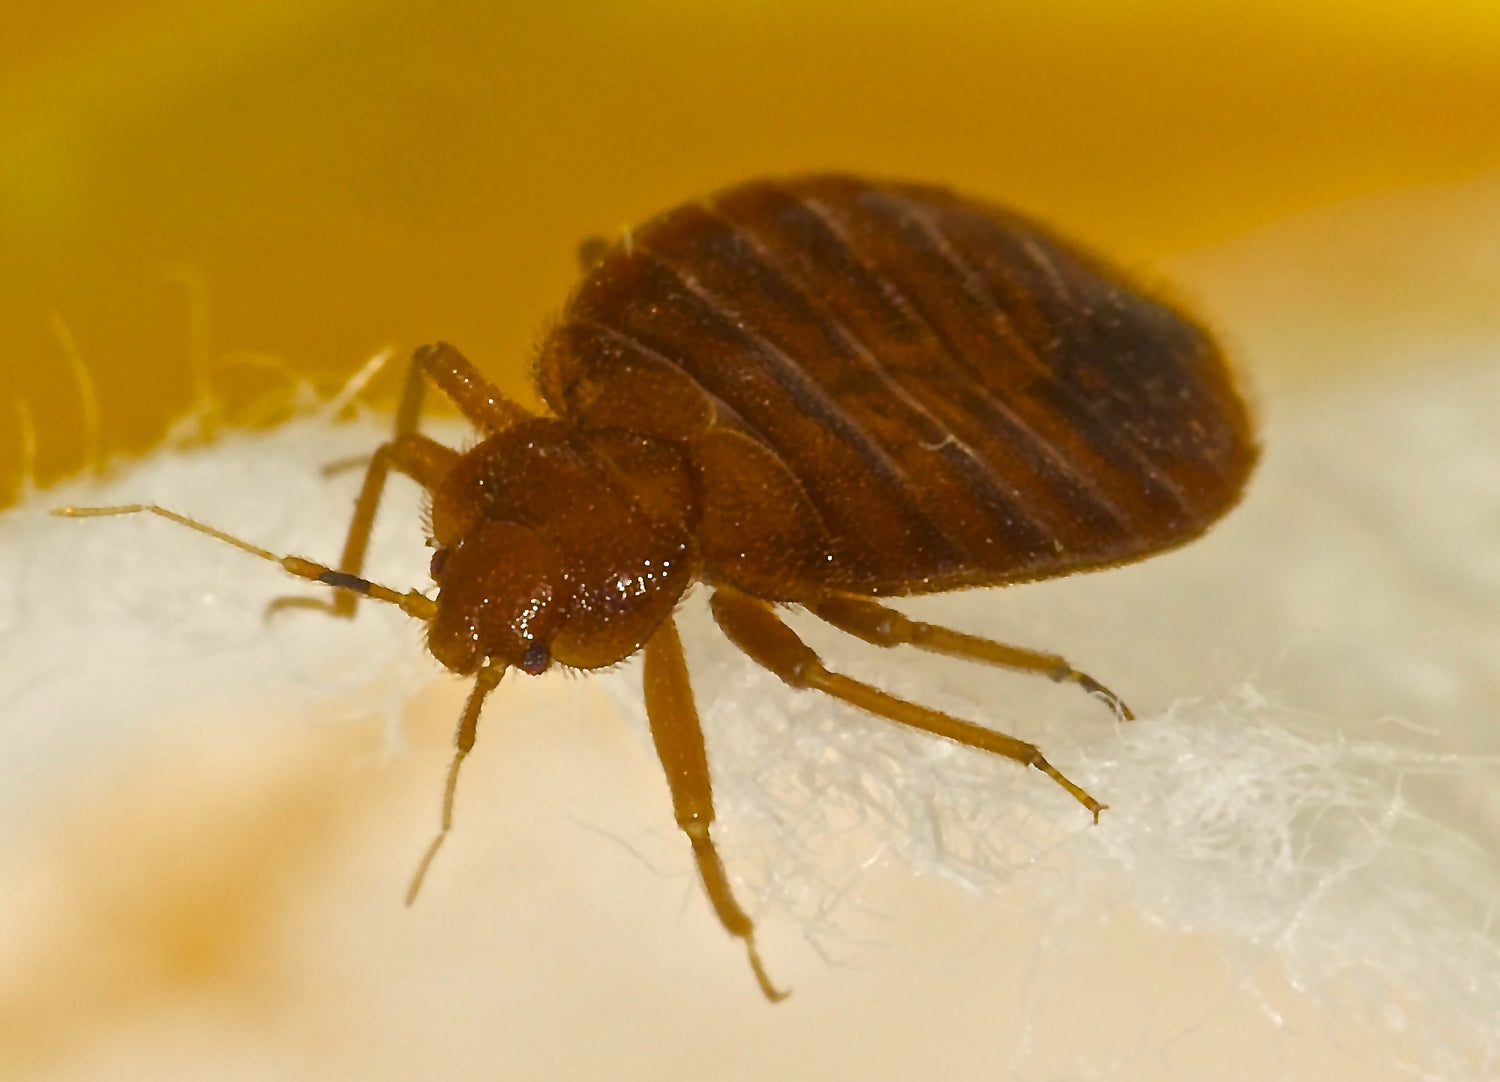 Bed bugs - How to identify and get rid of (2022)